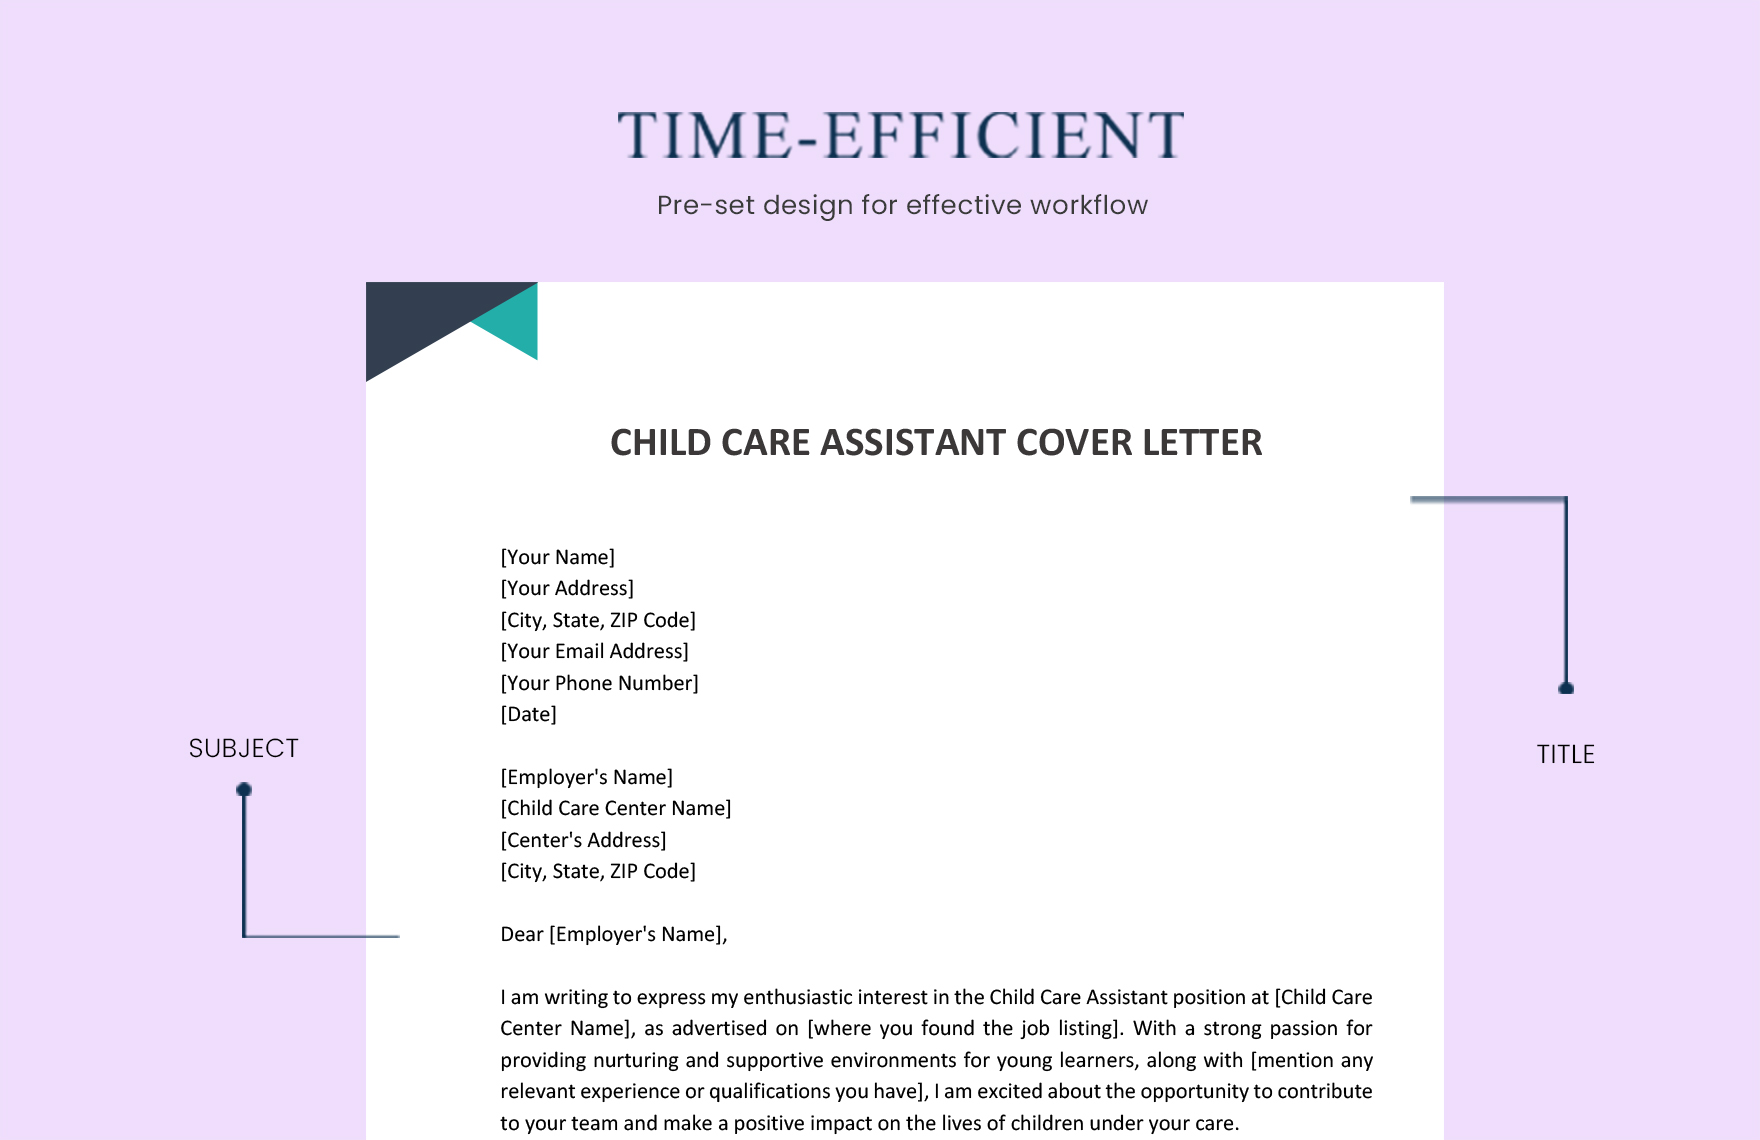 Child Care Assistant Cover Letter